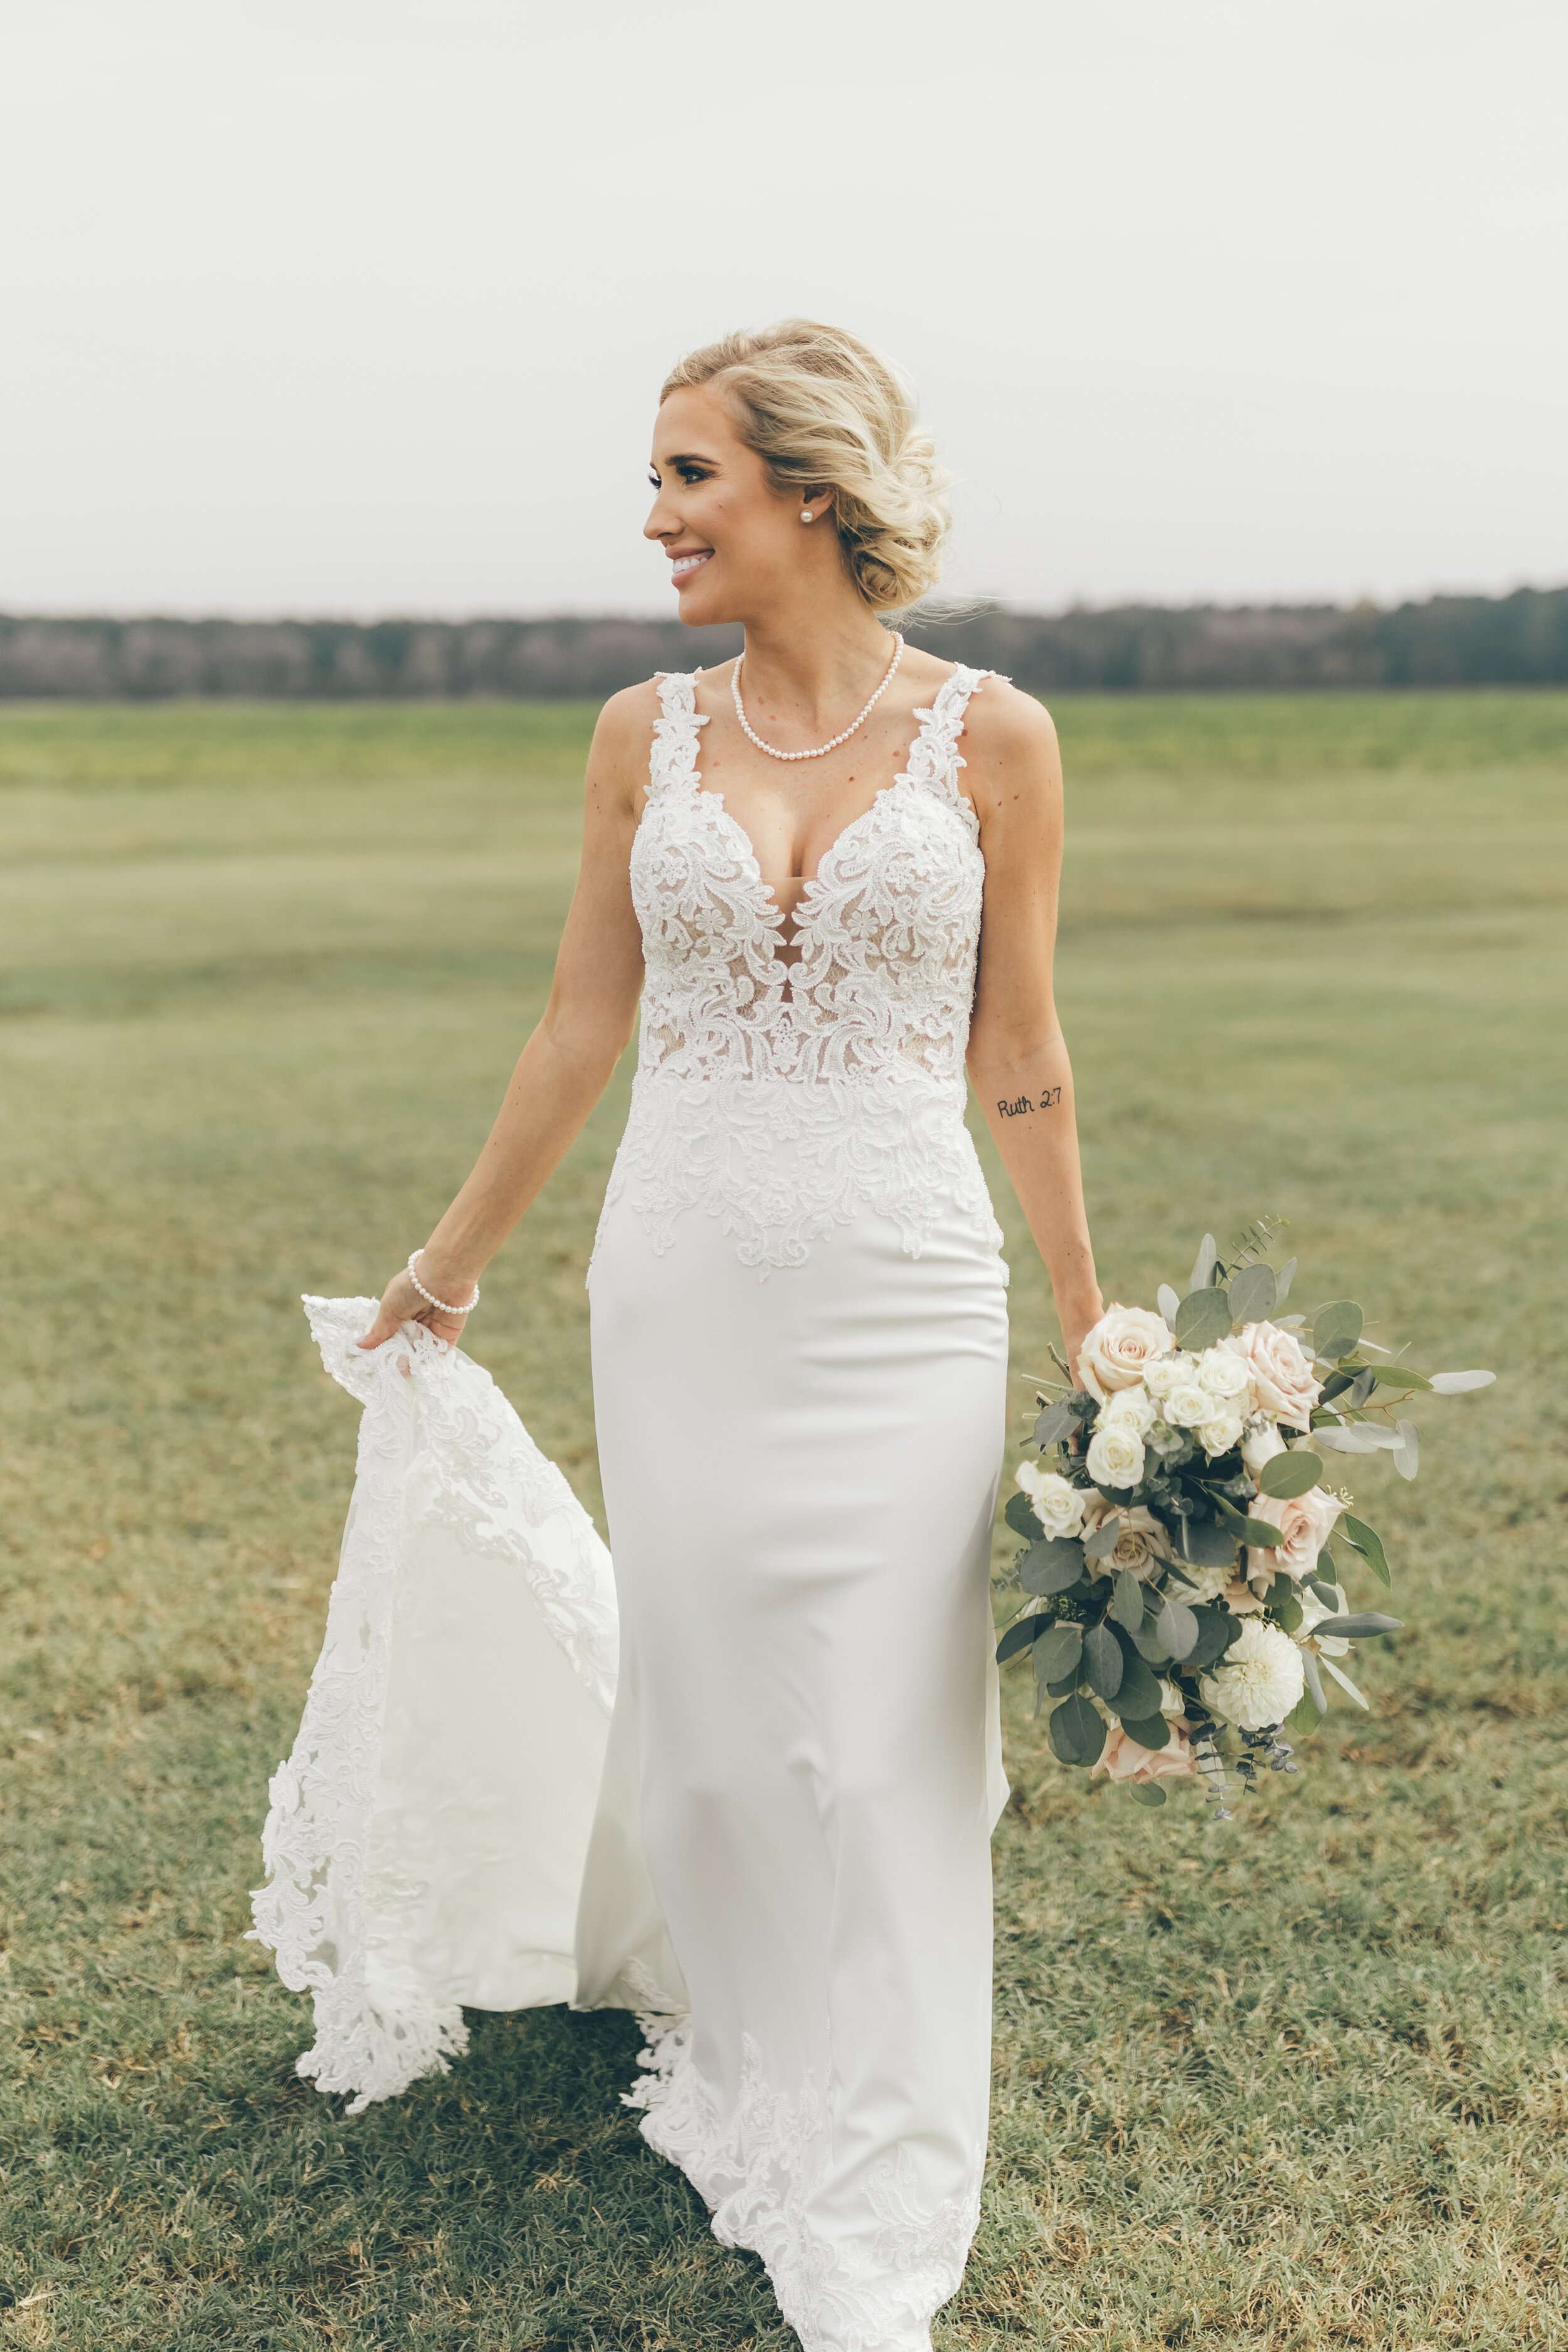 ivory-and-beau-bride-and-florals-real-bride-real-wedding-blog-wedding-dress-bridal-gown-wedding-gown-wedding-flowers-savannah-florist-wedding-florist-maggie-sottero-wedding-dress-organic-natural-wedding-Griffin_0245.jpg